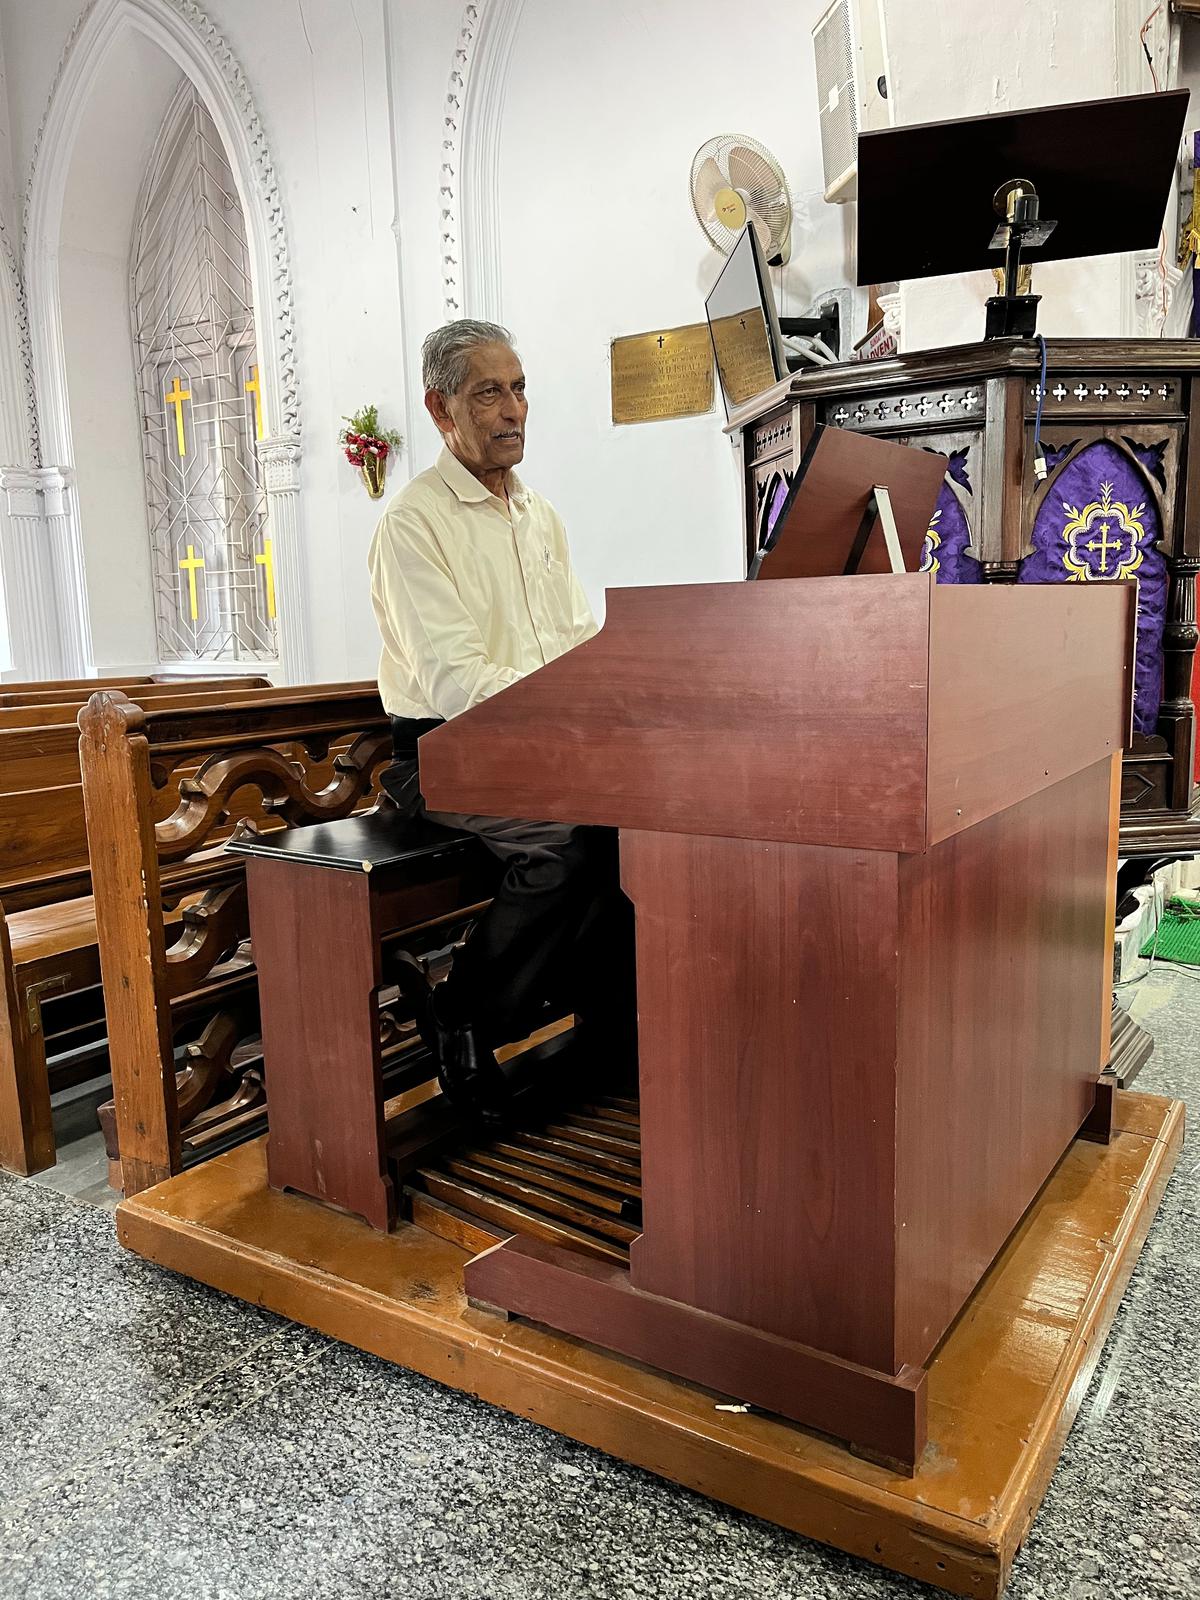 Henry Jaganathan now plays the organ after his father I Jaganathan’s demise